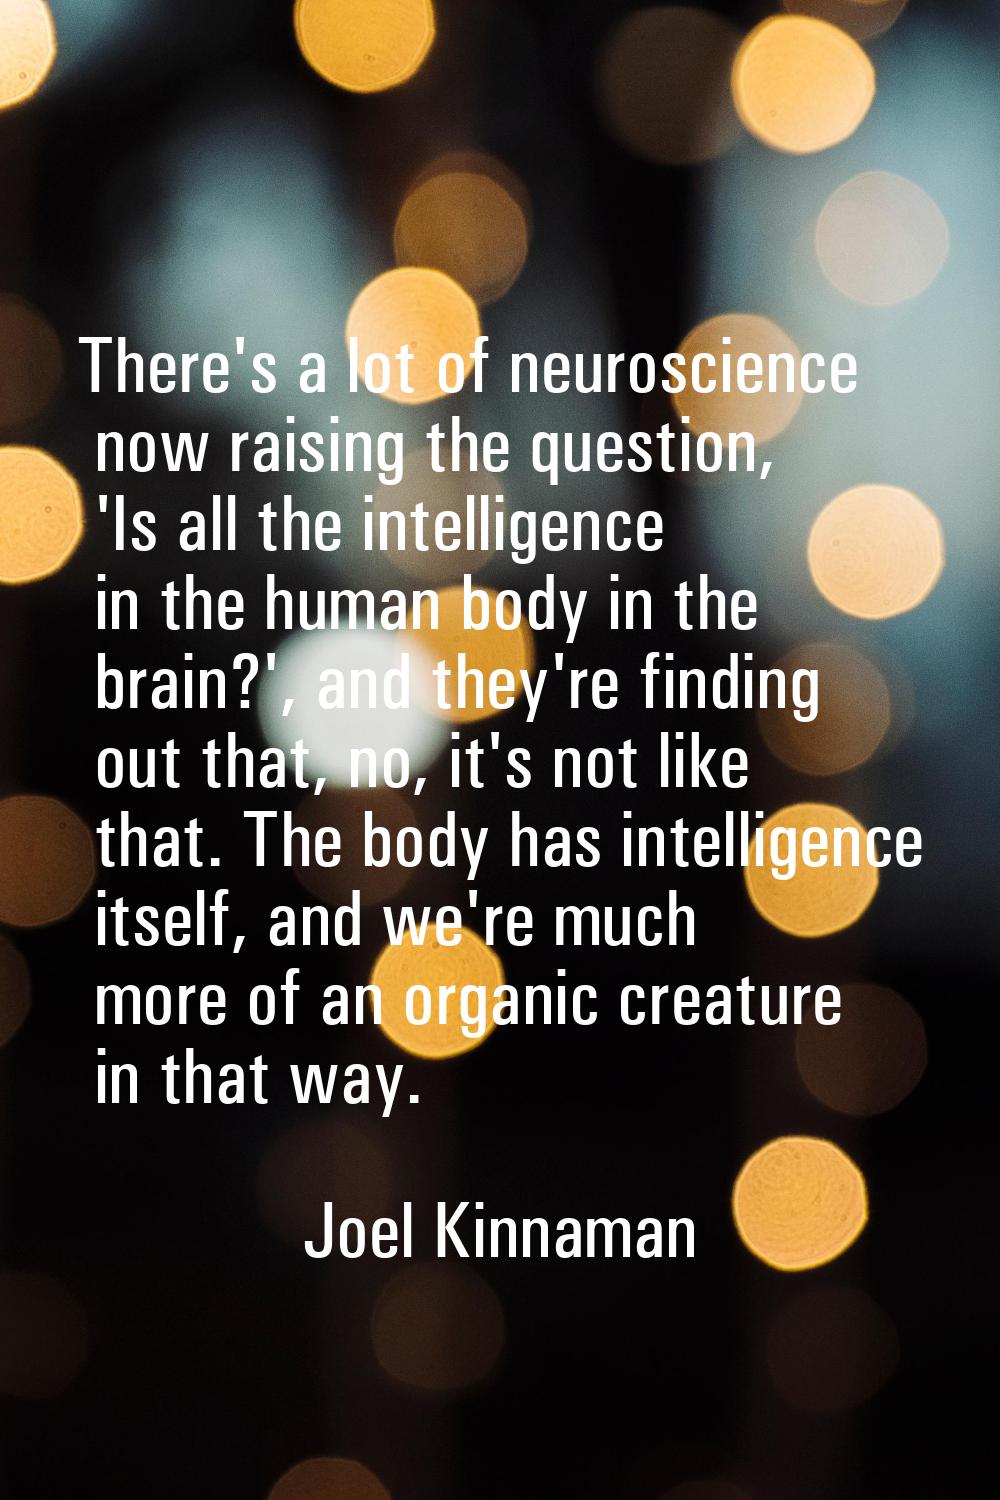 There's a lot of neuroscience now raising the question, 'Is all the intelligence in the human body 